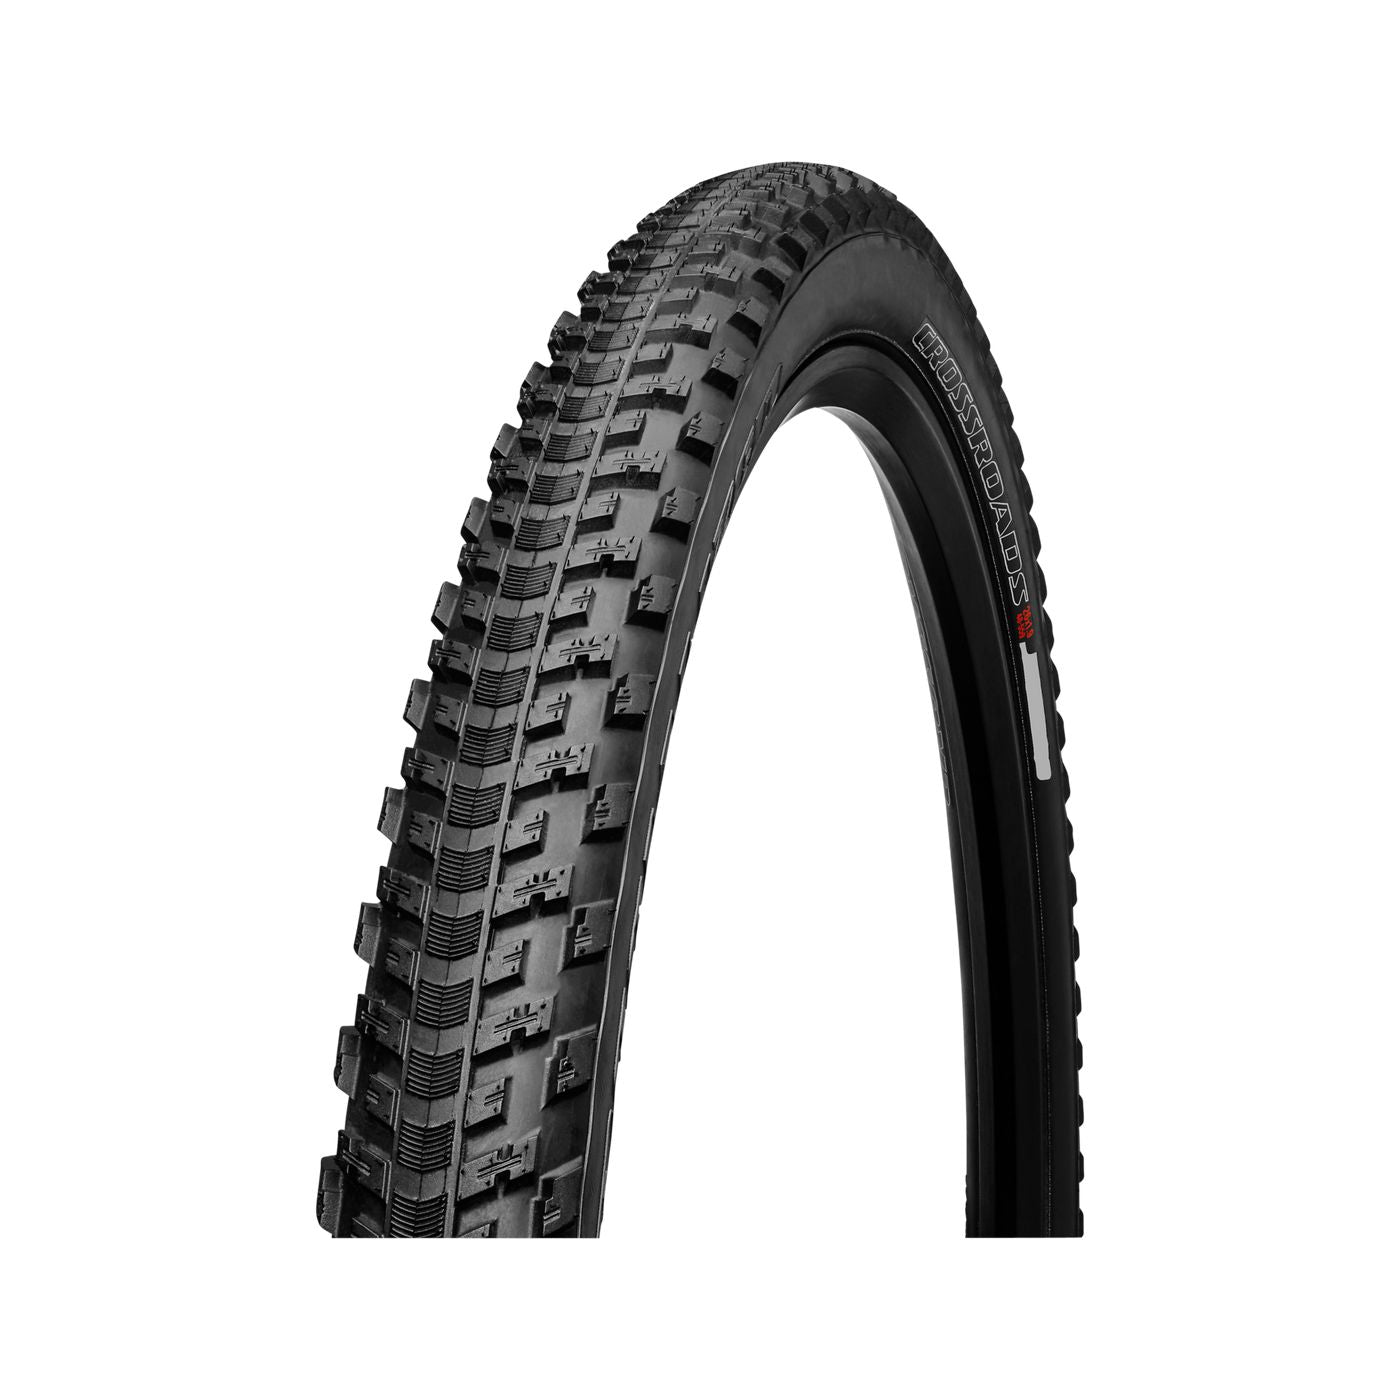 Specialized Crossroads Armadillo 26" Bike Tire - Tires - Bicycle Warehouse